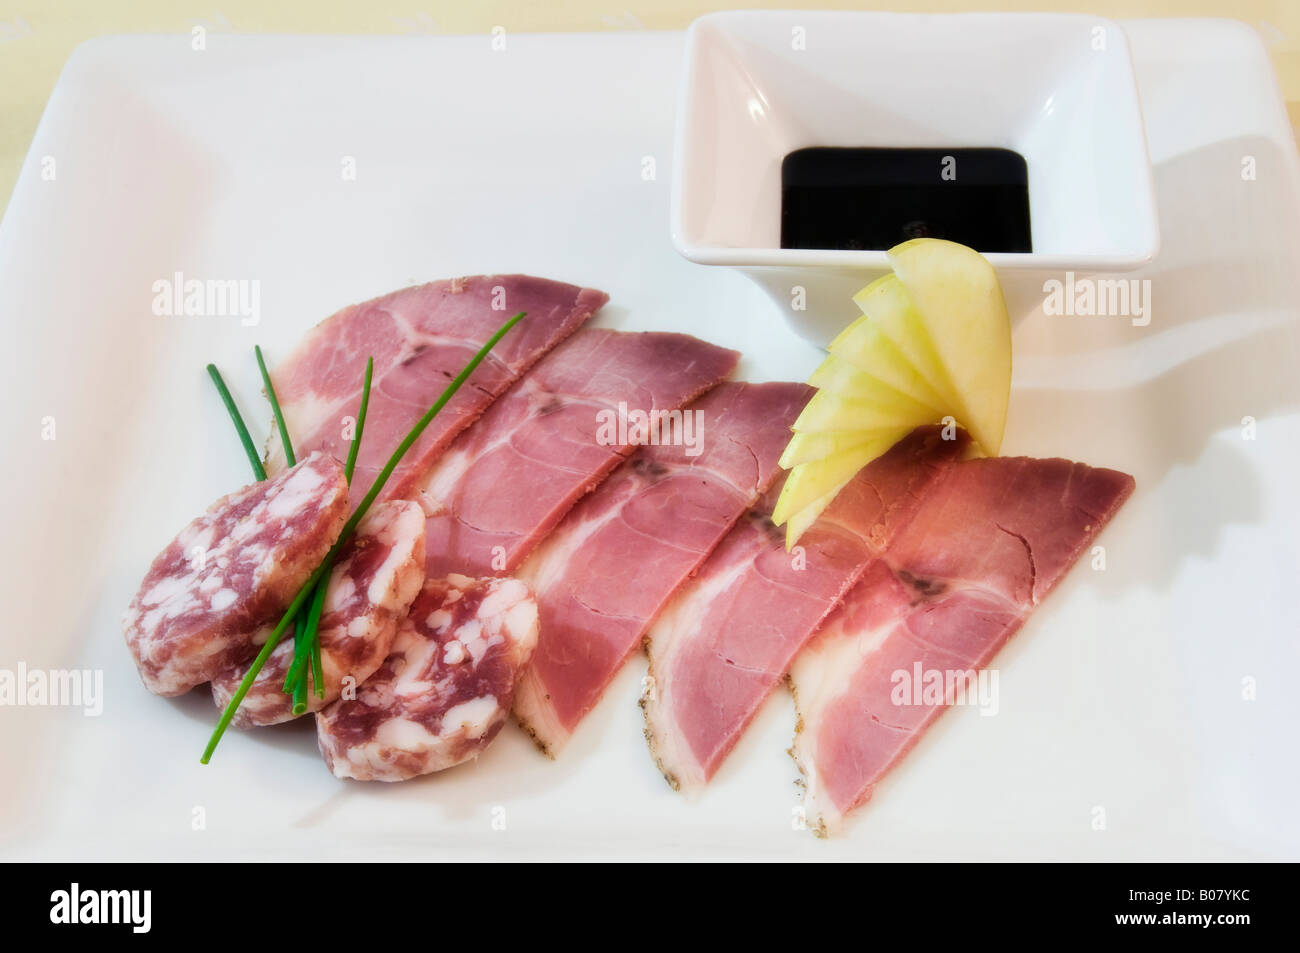 Tipical italian salumi, various kinds of cold meat made of pork, arranged in a square dish Stock Photo